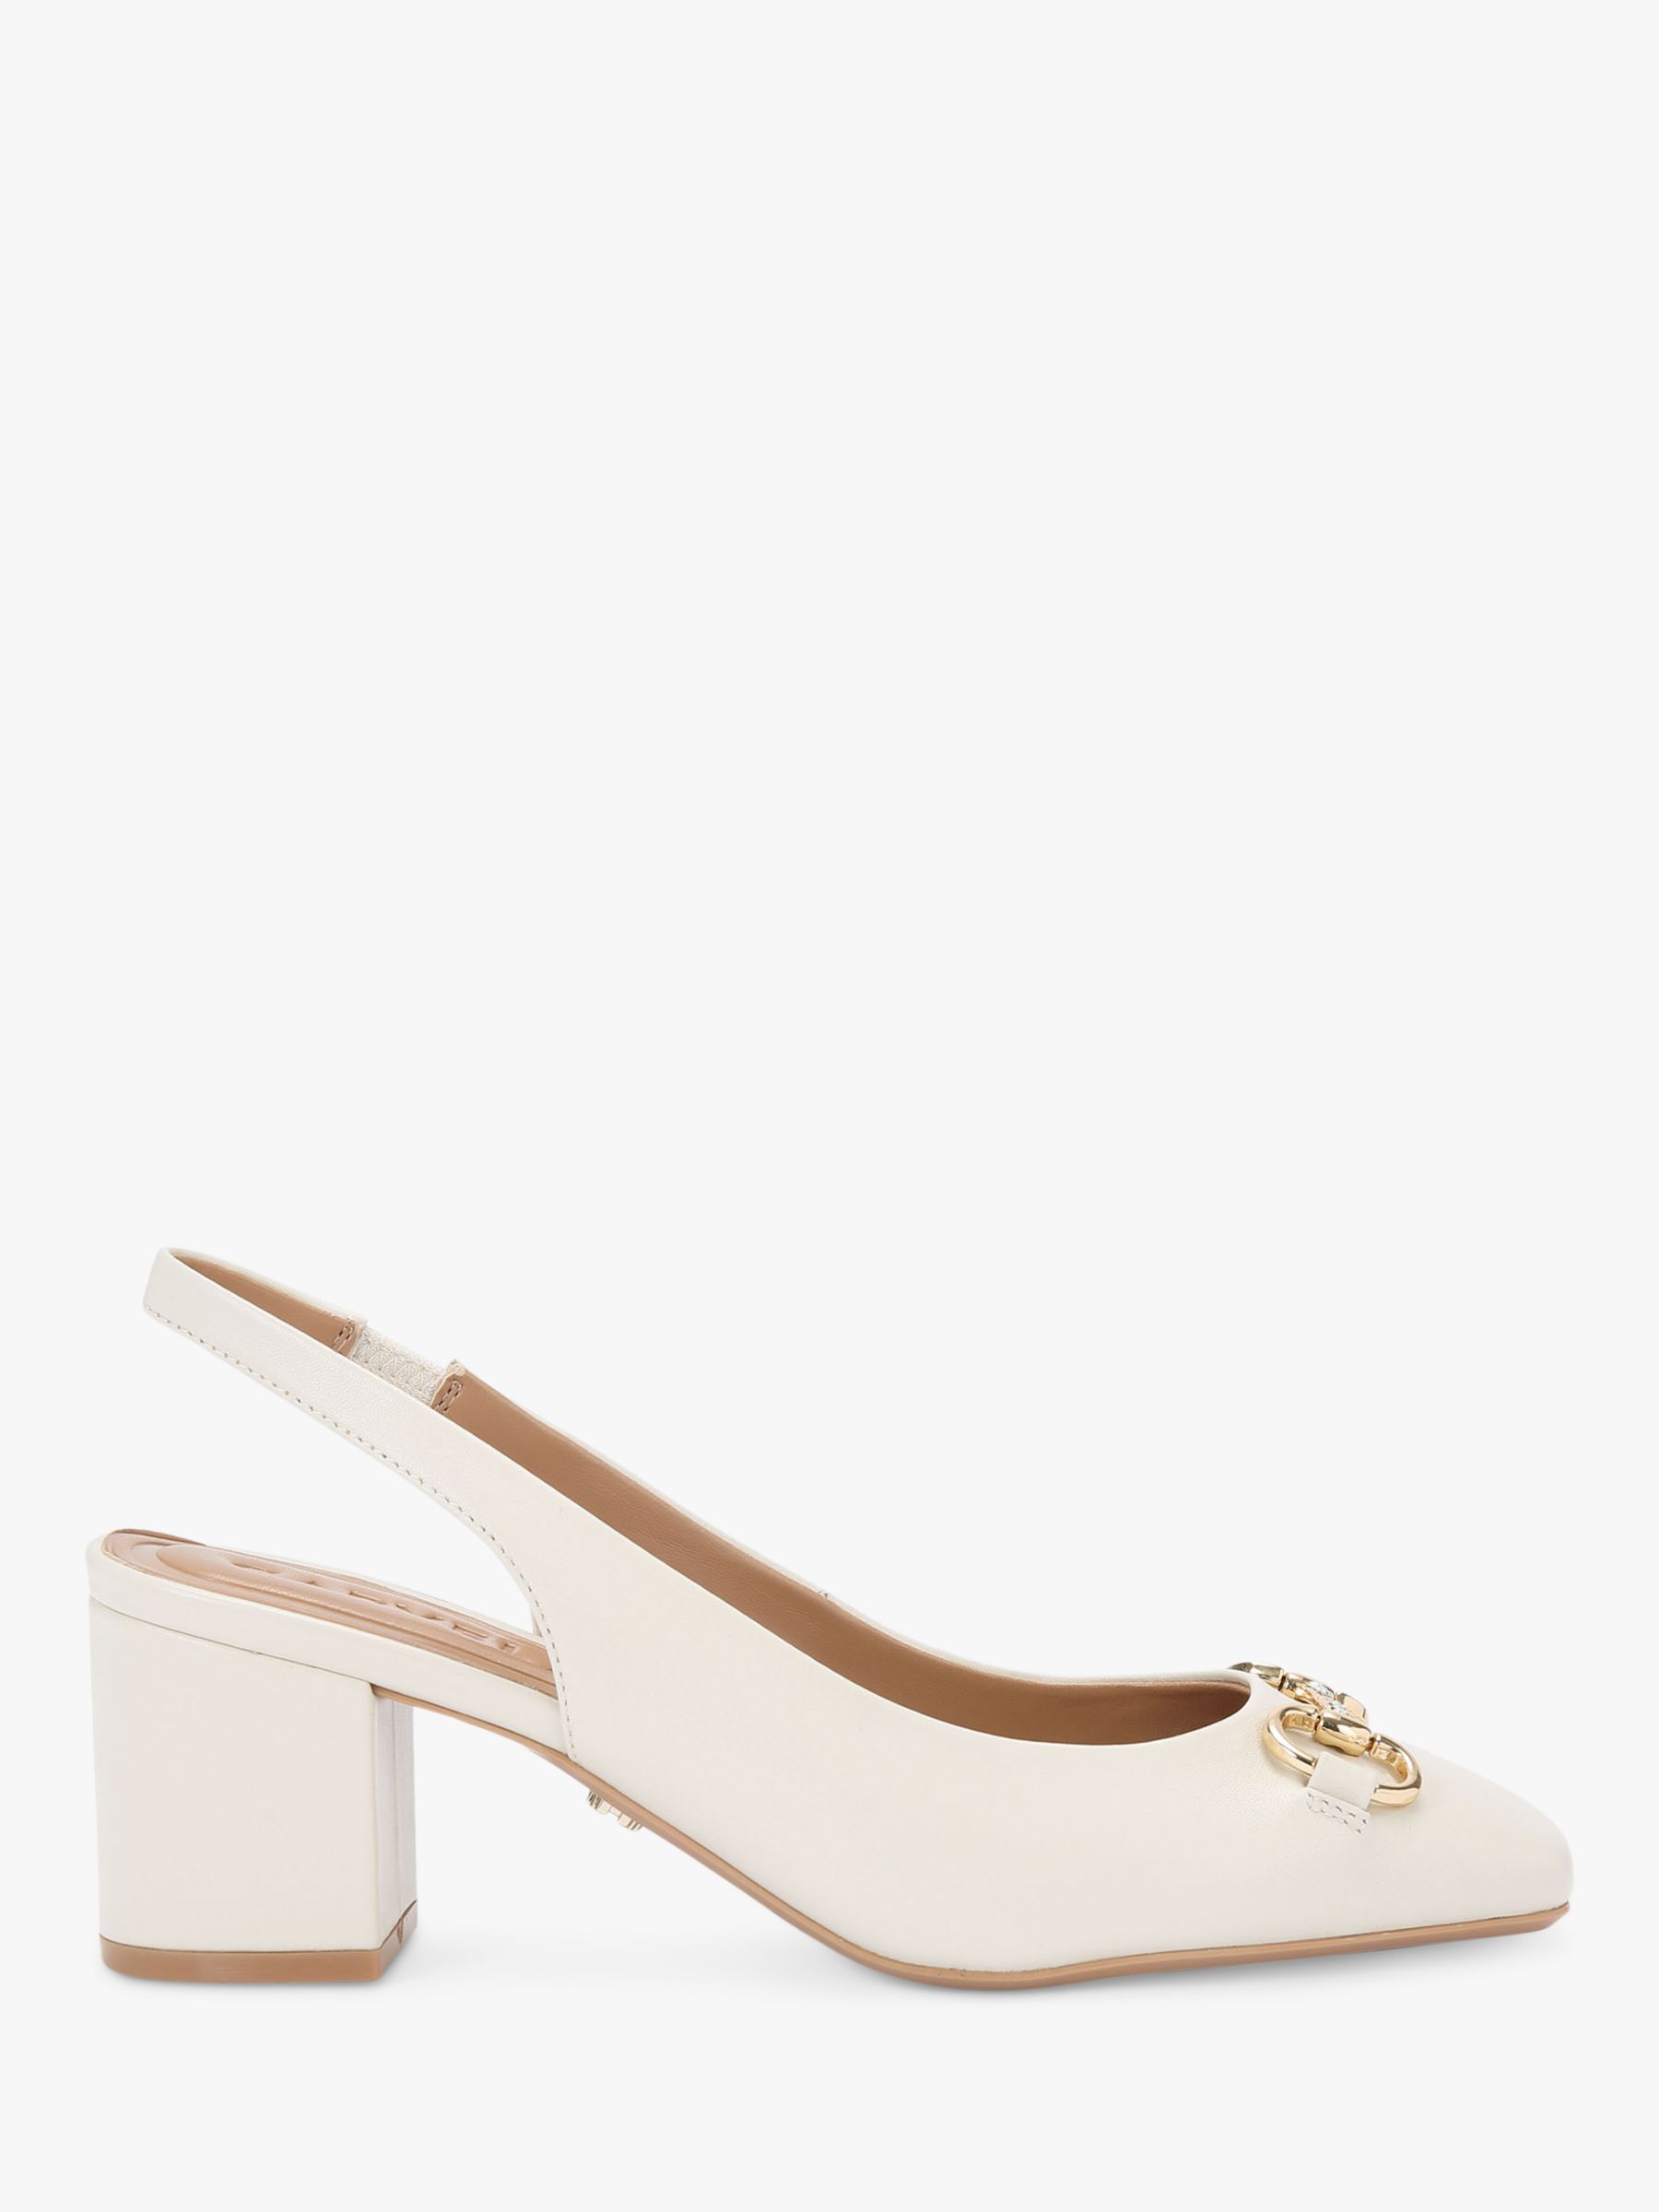 Carvela Poise Slingback Court Shoes, Natural Putty, 3